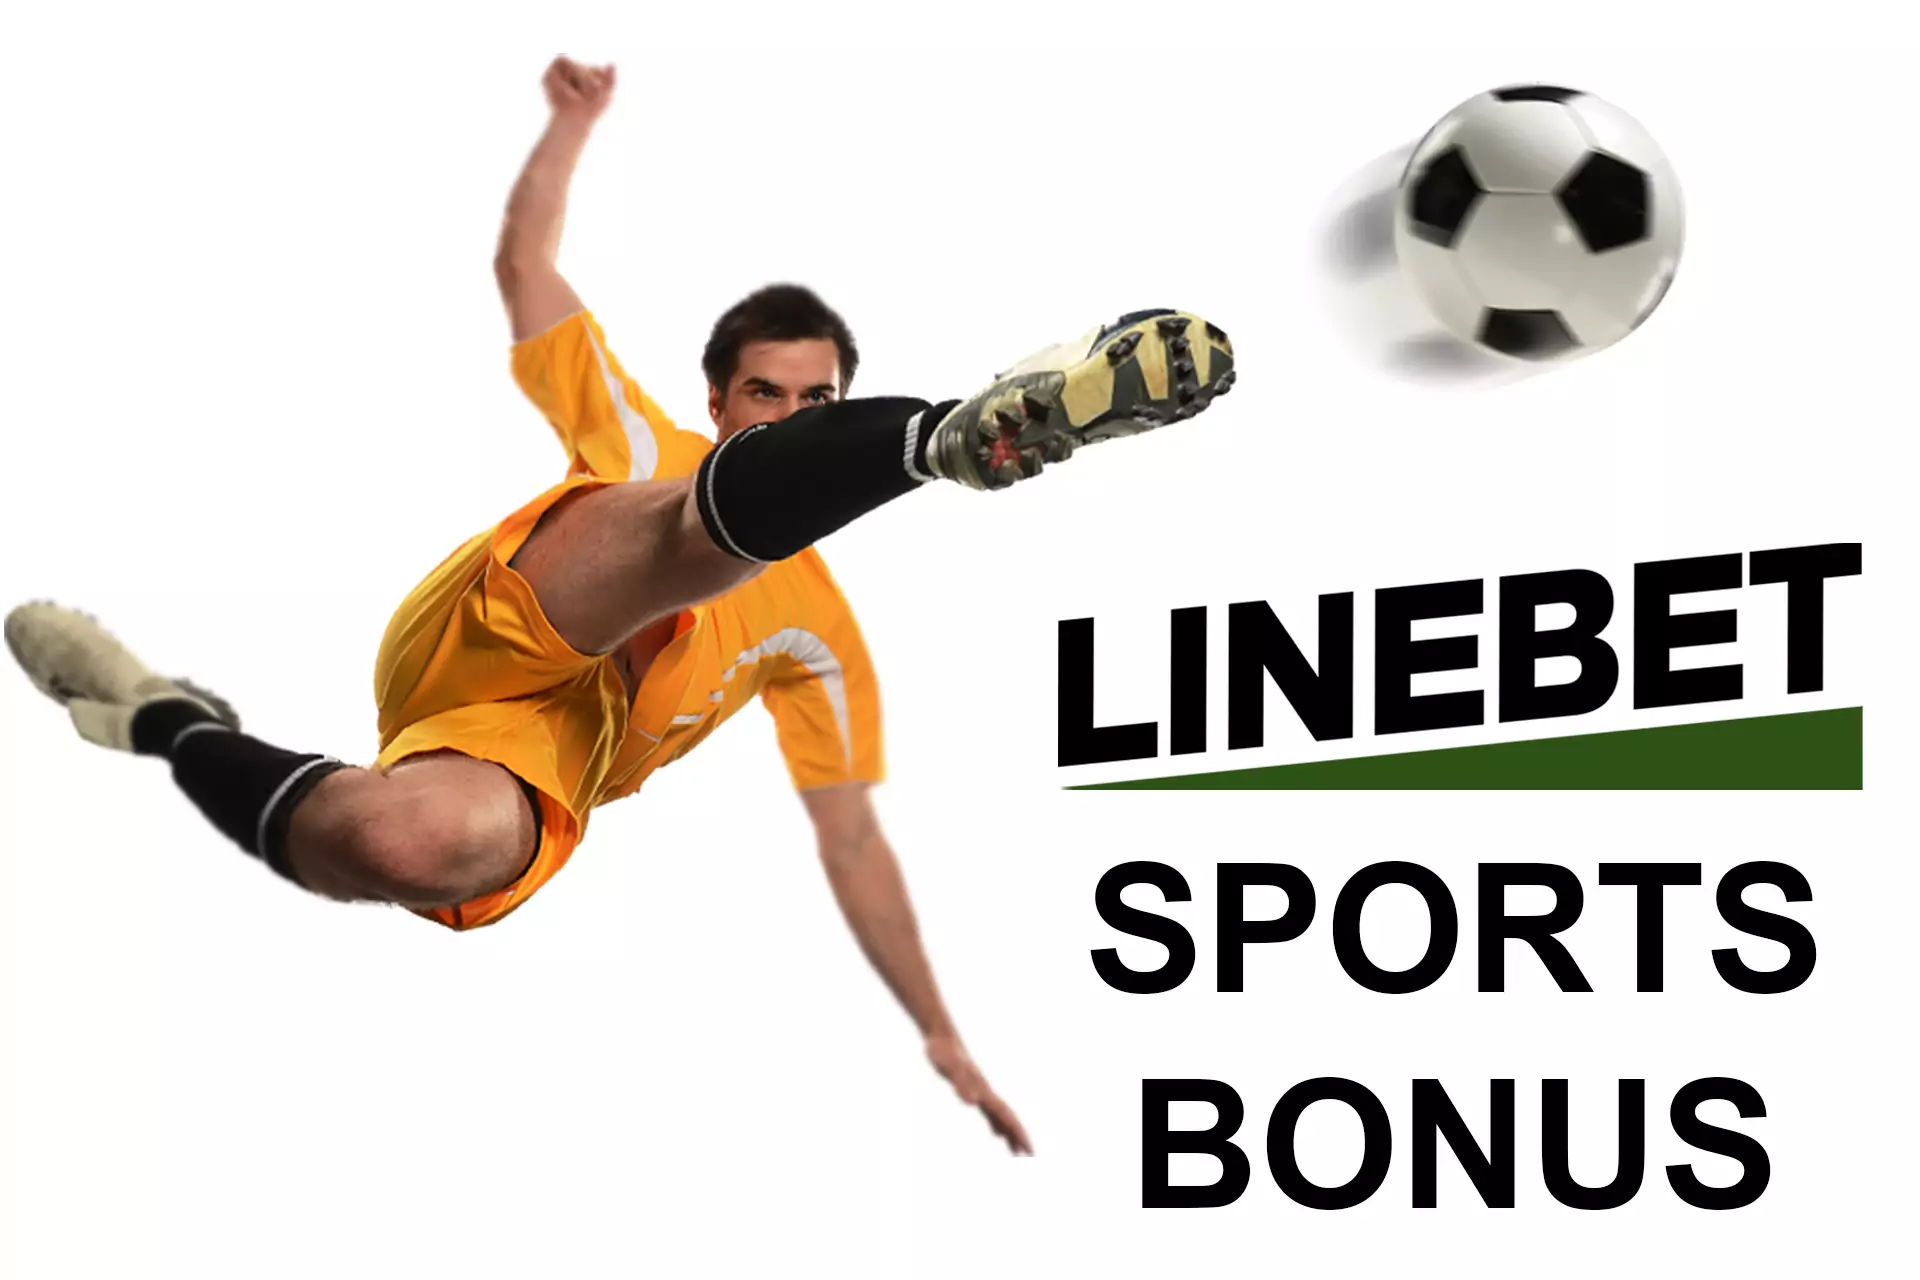 You can spend your welcome offer on sports or esports betting as well.